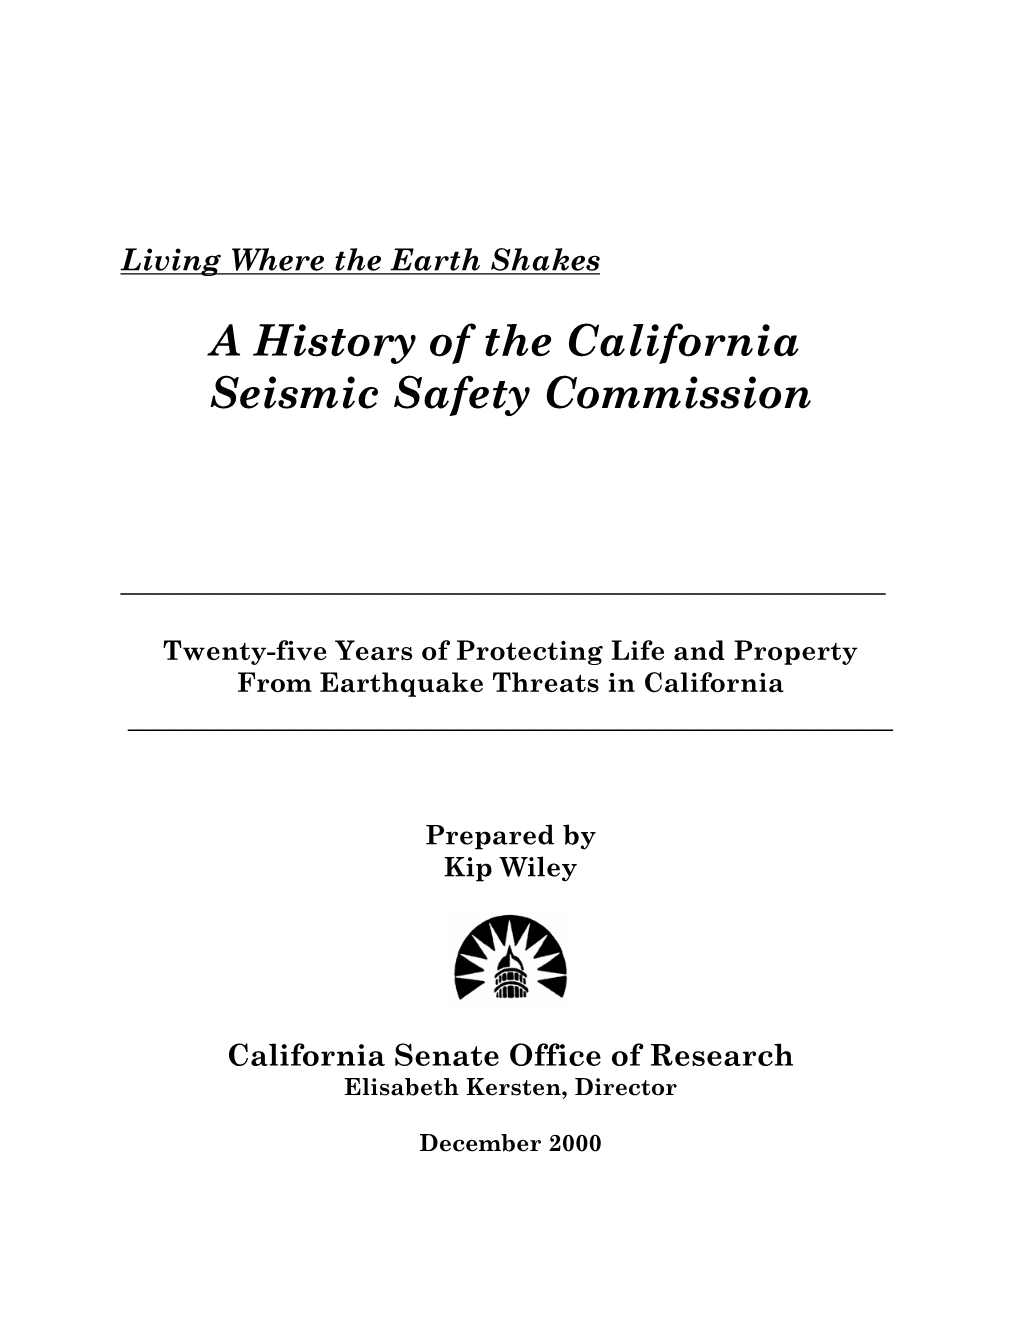 A History of the California Seismic Safety Commission